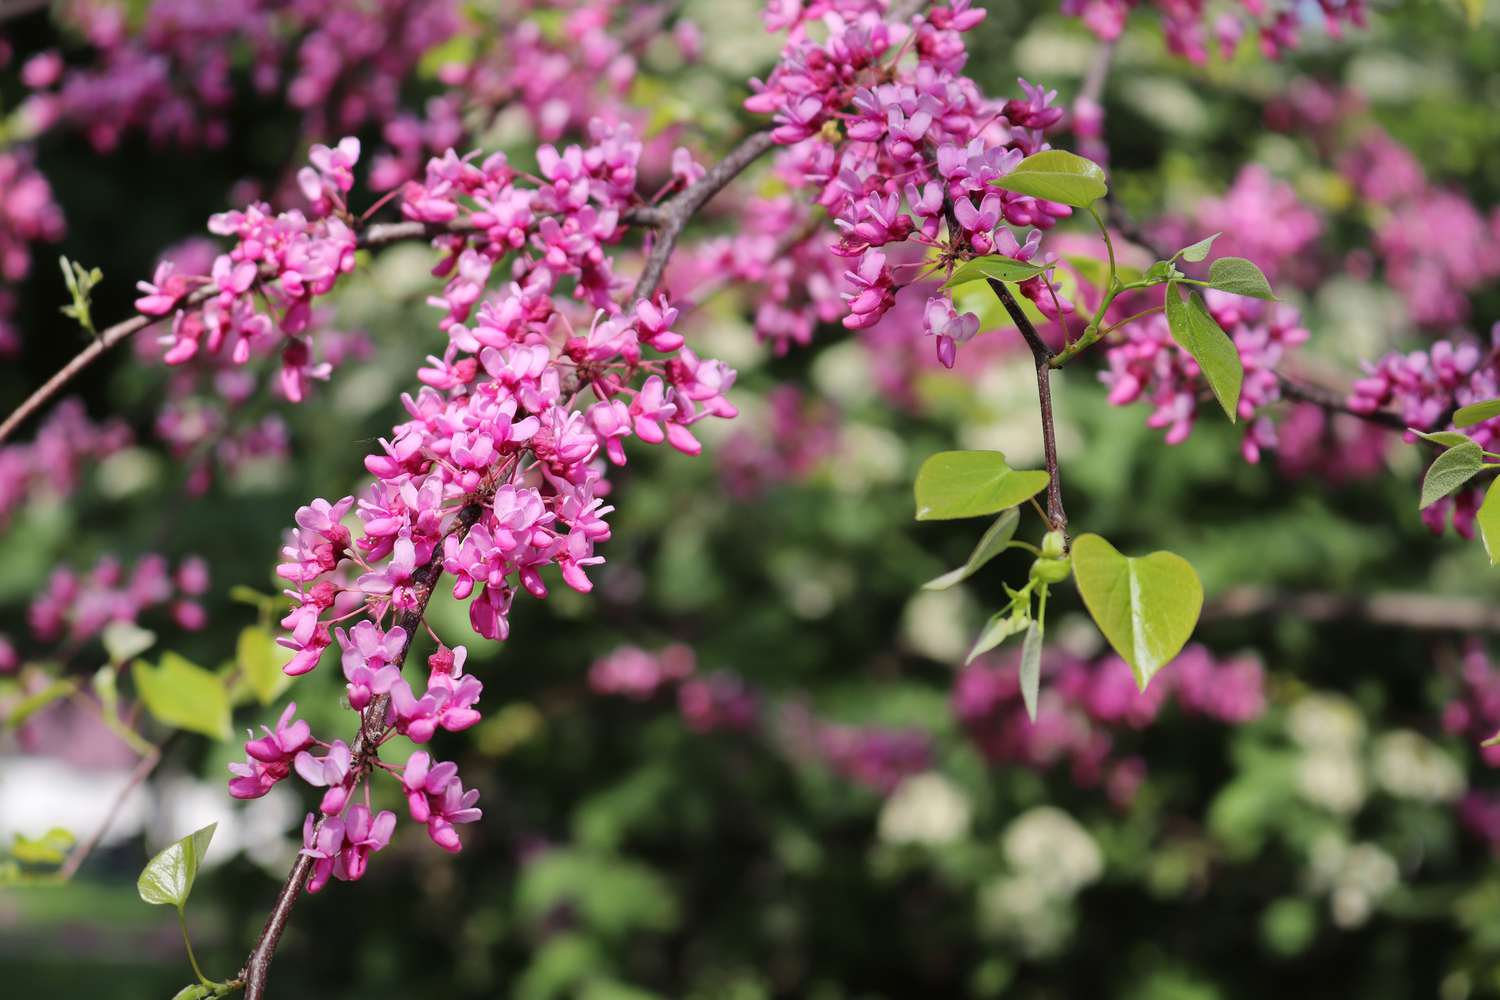 Branch of redbud tree showing blooms and leaves.